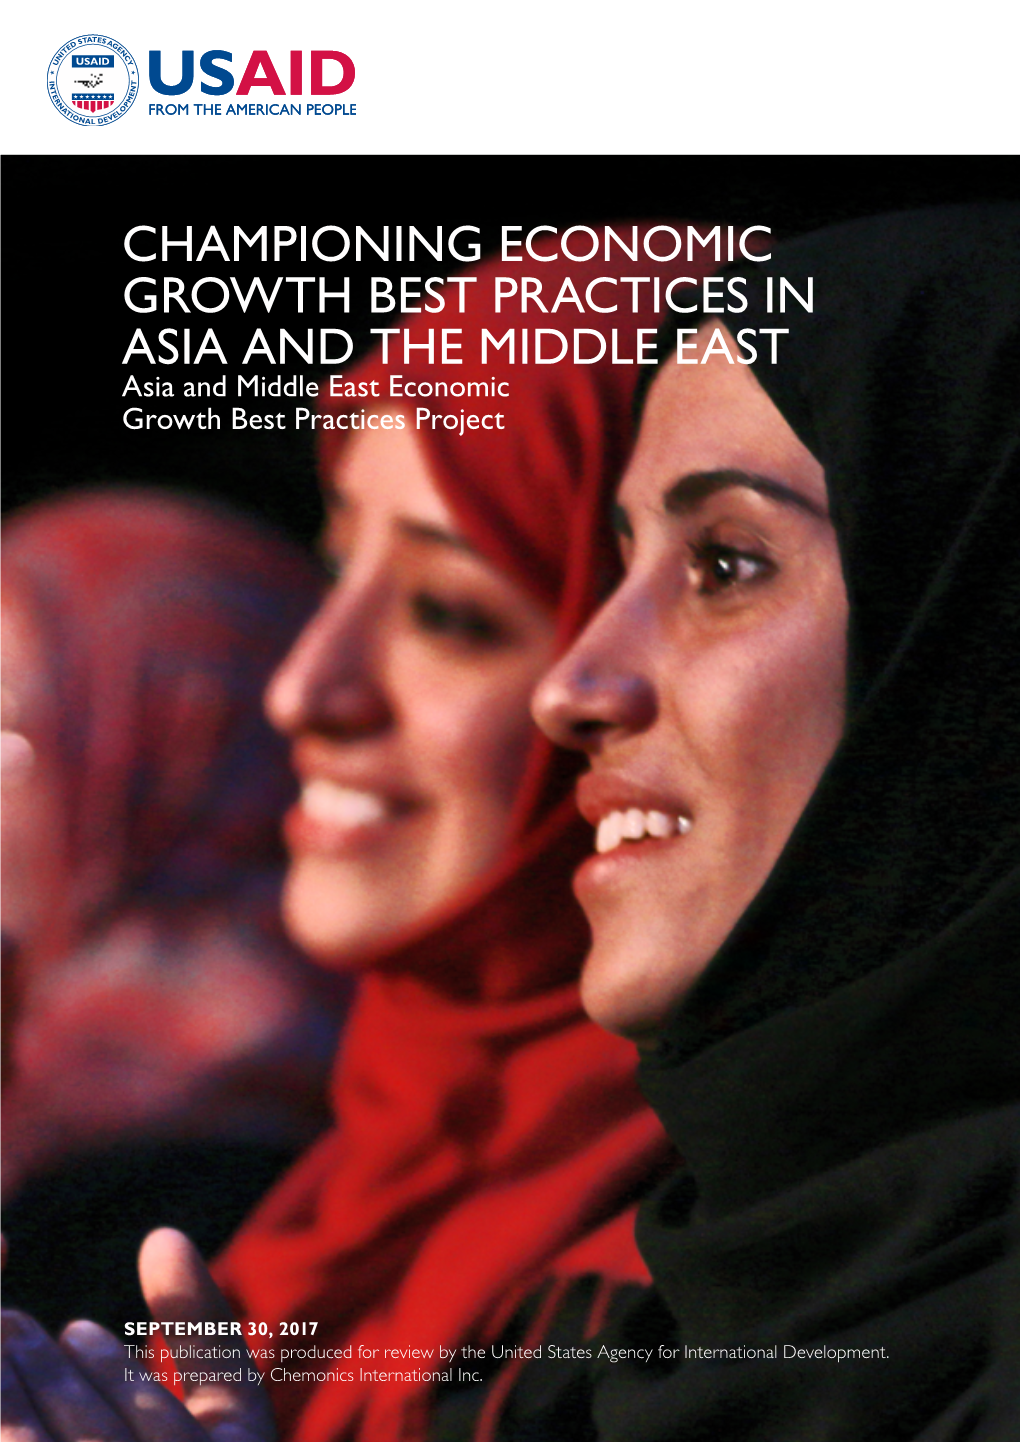 CHAMPIONING ECONOMIC GROWTH BEST PRACTICES in ASIA and the MIDDLE EAST Asia and Middle East Economic Growth Best Practices Project